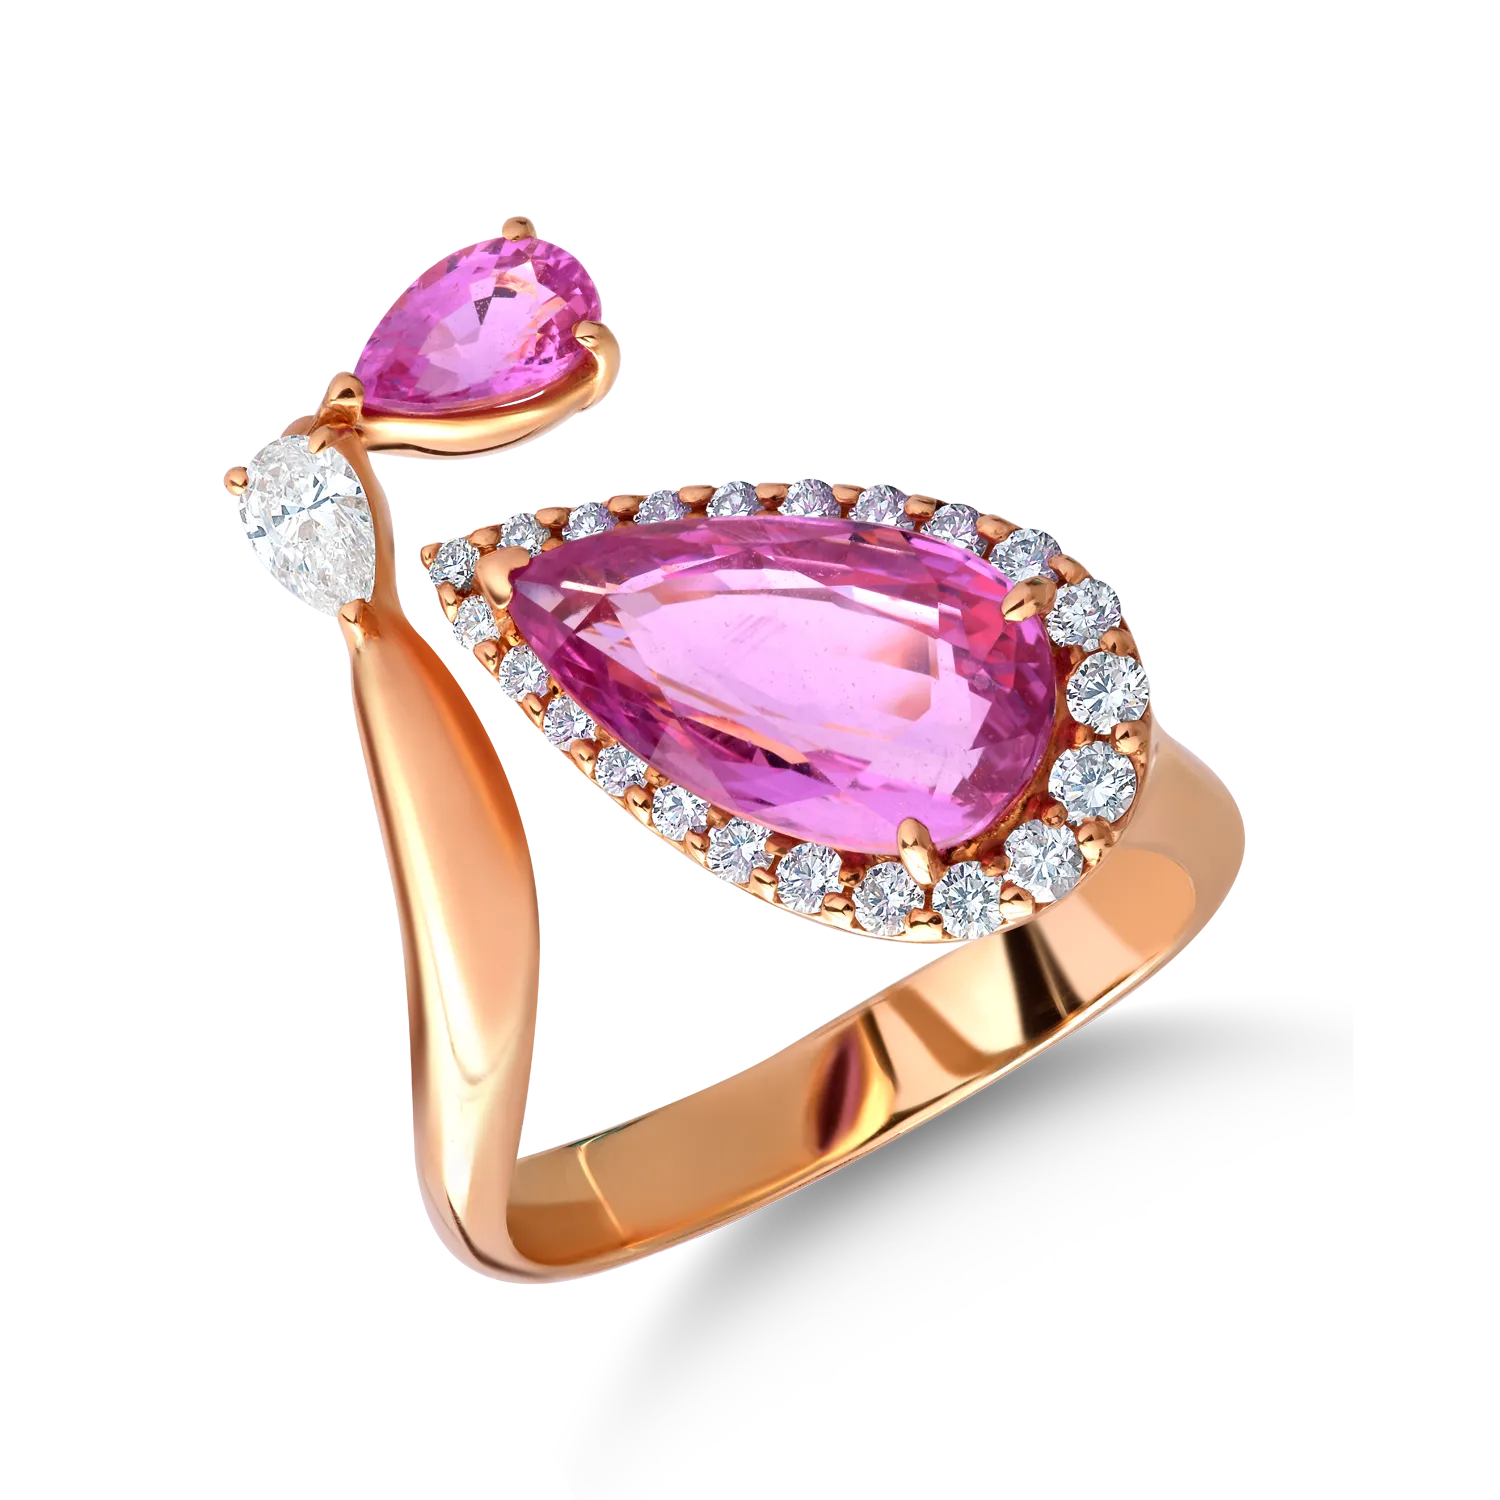 18K rose gold ring with 4.33ct pink sapphires and 0.47ct diamonds